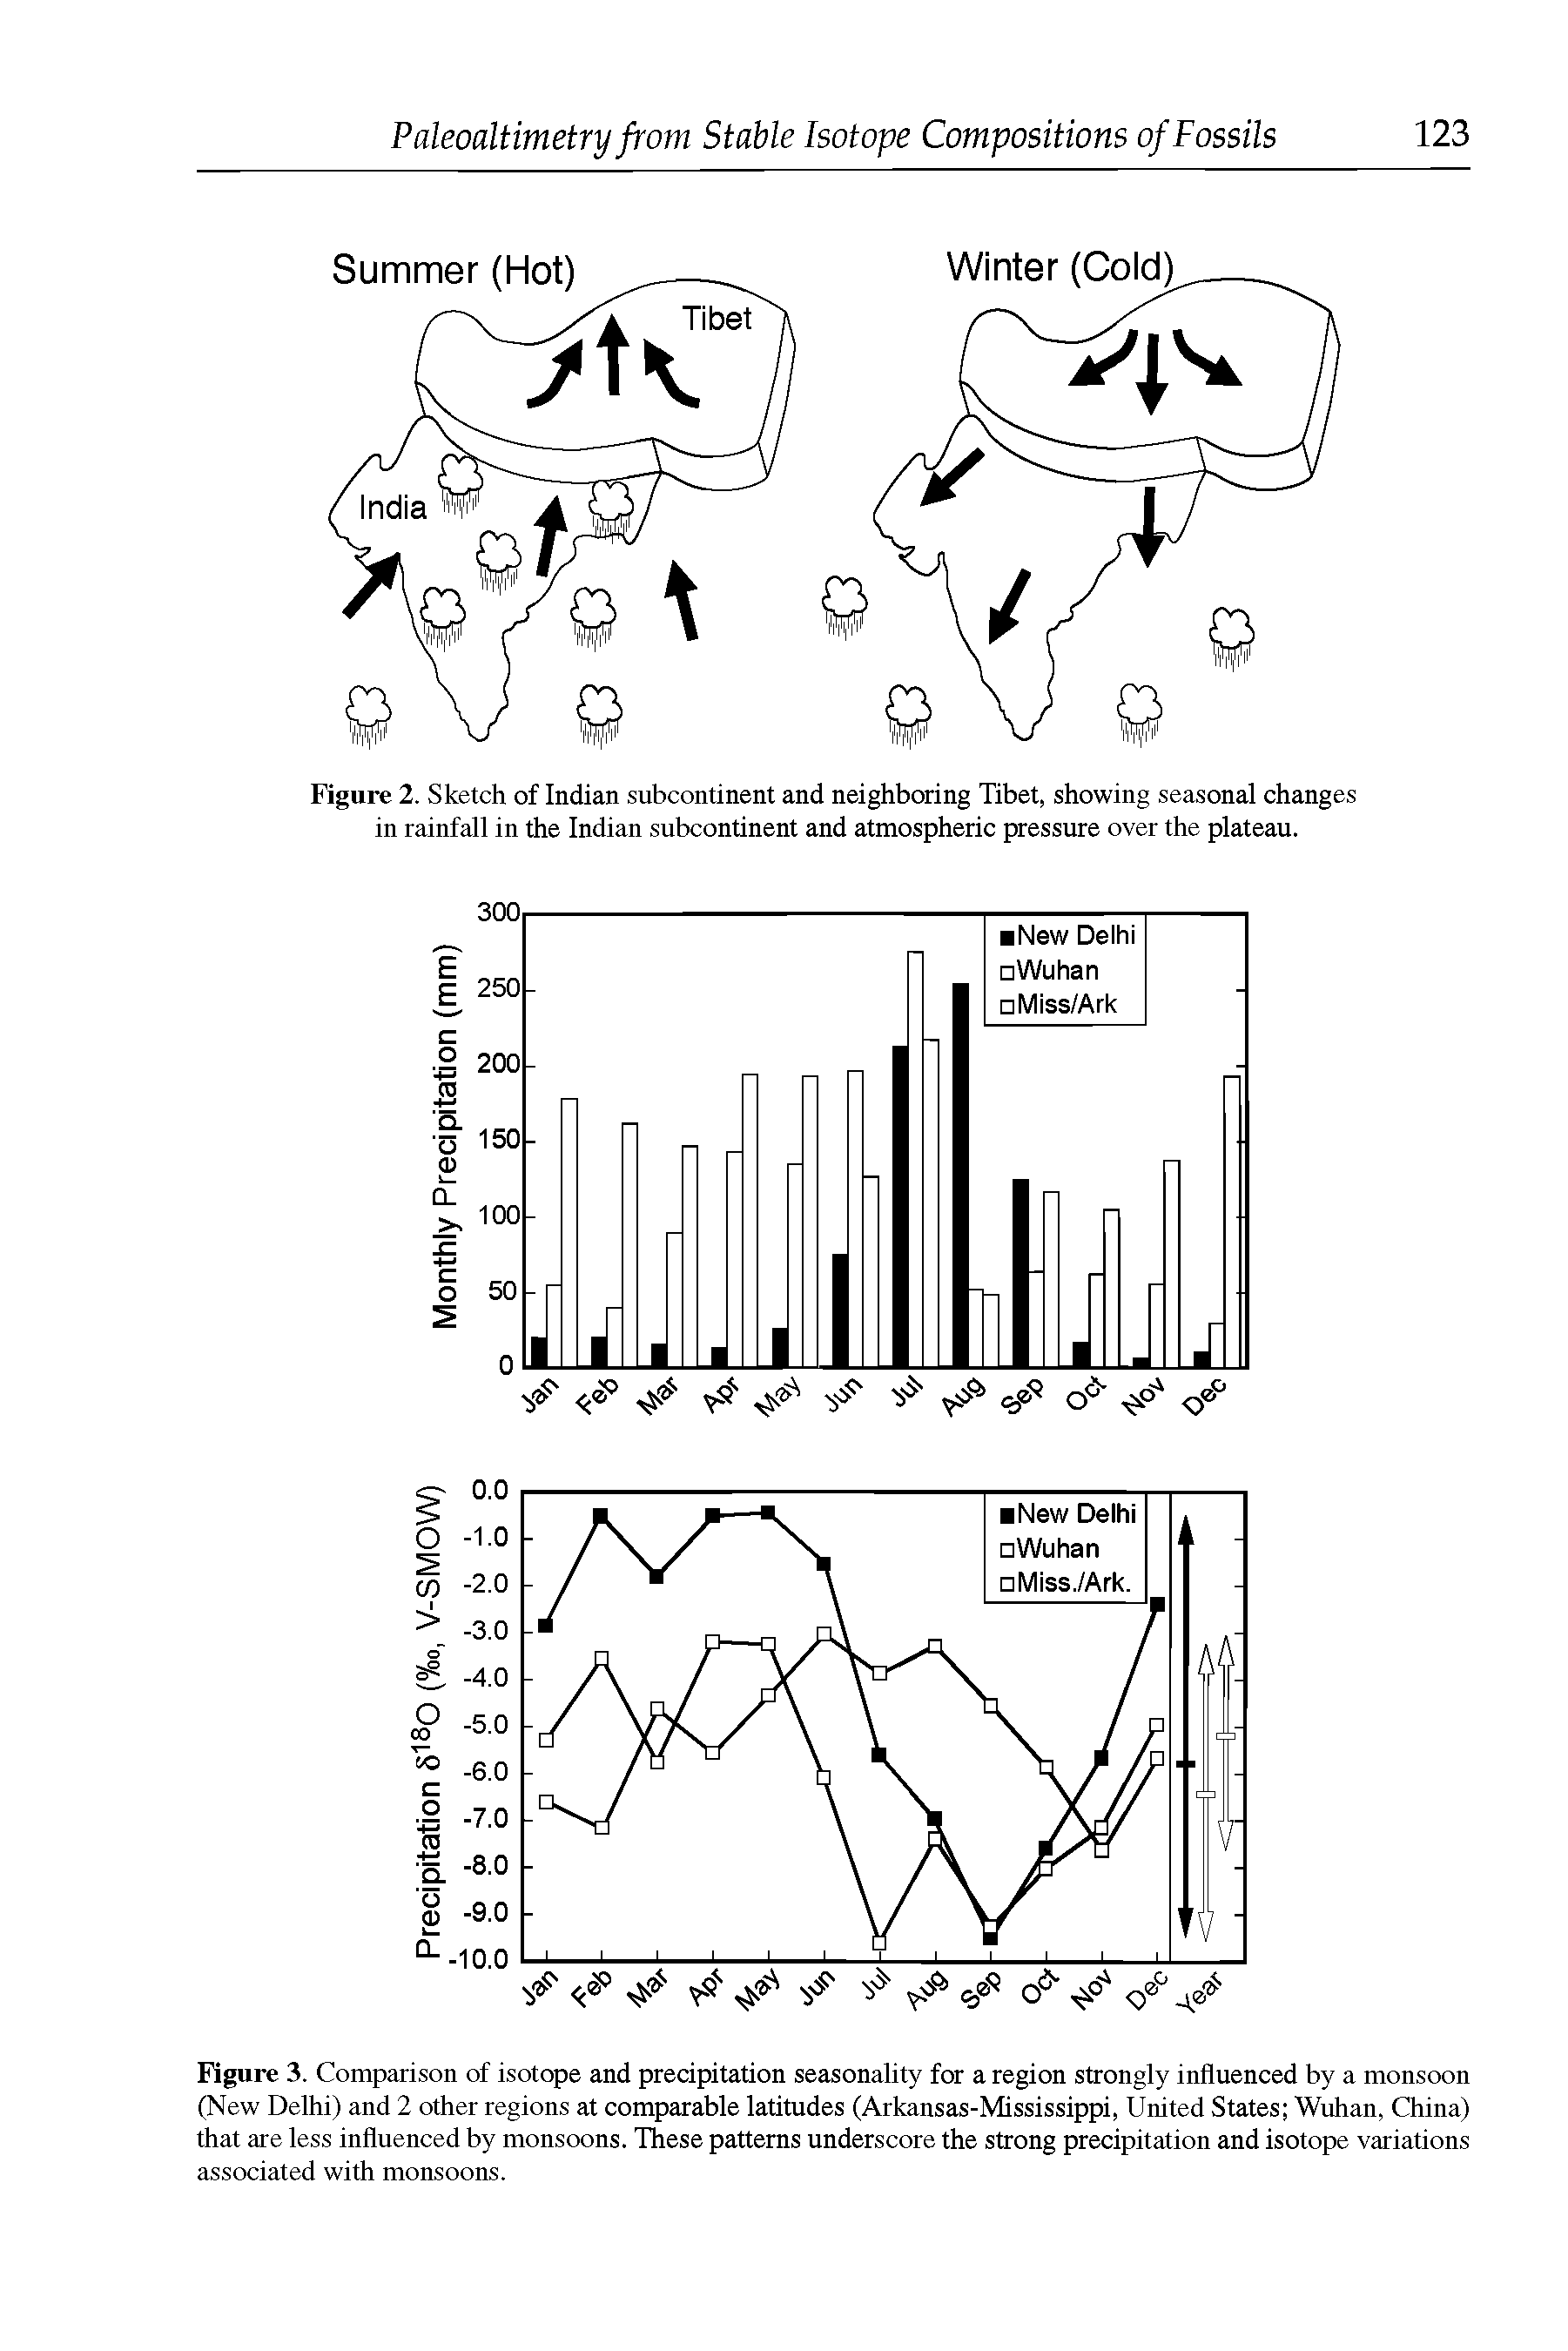 Figure 3. Comparison of isotope and precipitation seasonality for a region strongly influenced by a monsoon (New Delhi) and 2 other regions at comparable latitudes (Arkansas-Mississippi, United States Wuhan, China) that are less influenced by monsoons. These patterns underscore the strong precipitation and isotope variations associated with monsoons.